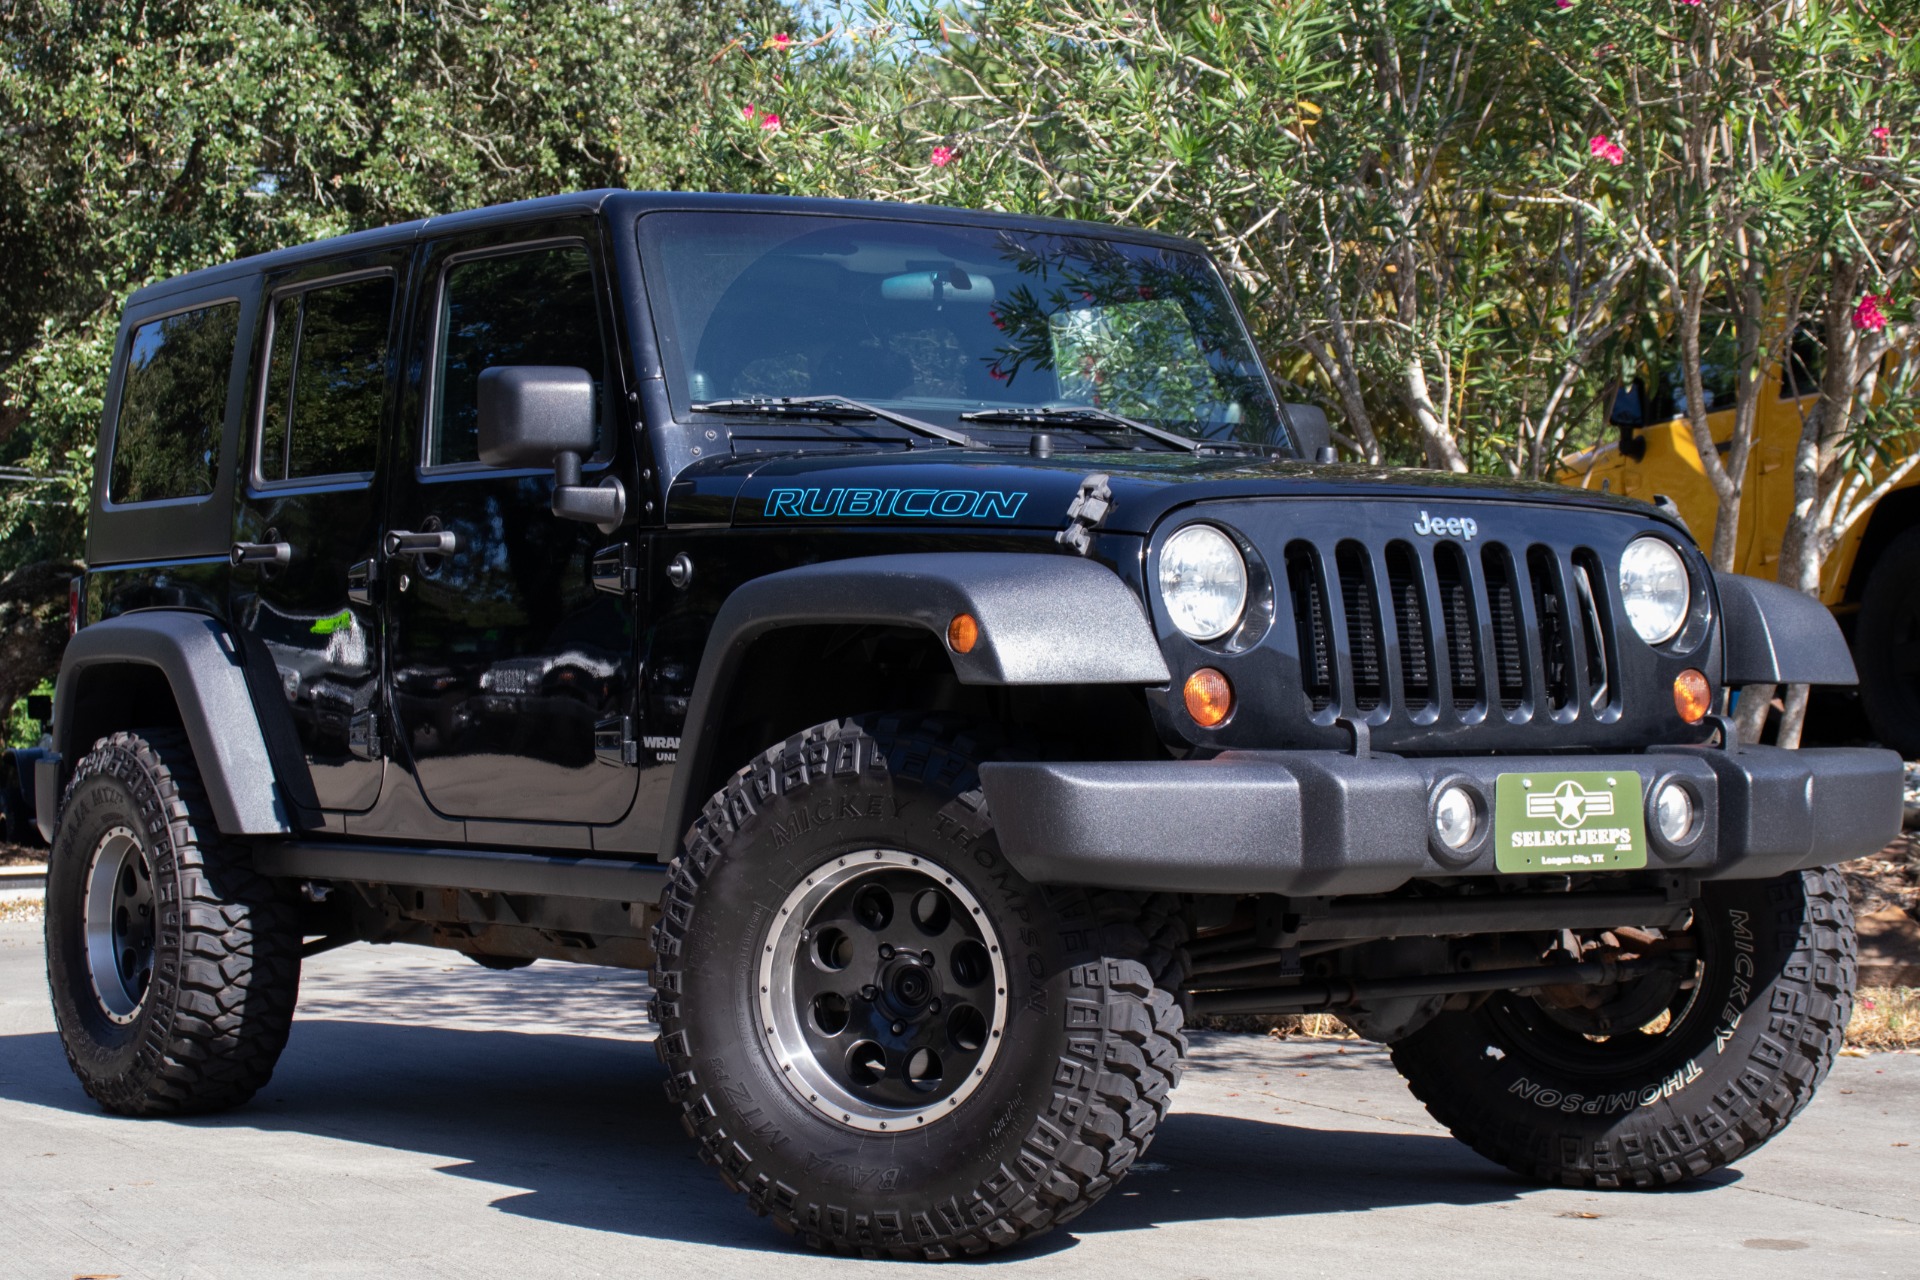 Used 2012 Jeep Wrangler Unlimited Rubicon For Sale ($25,995) | Select Jeeps  Inc. Stock #134093